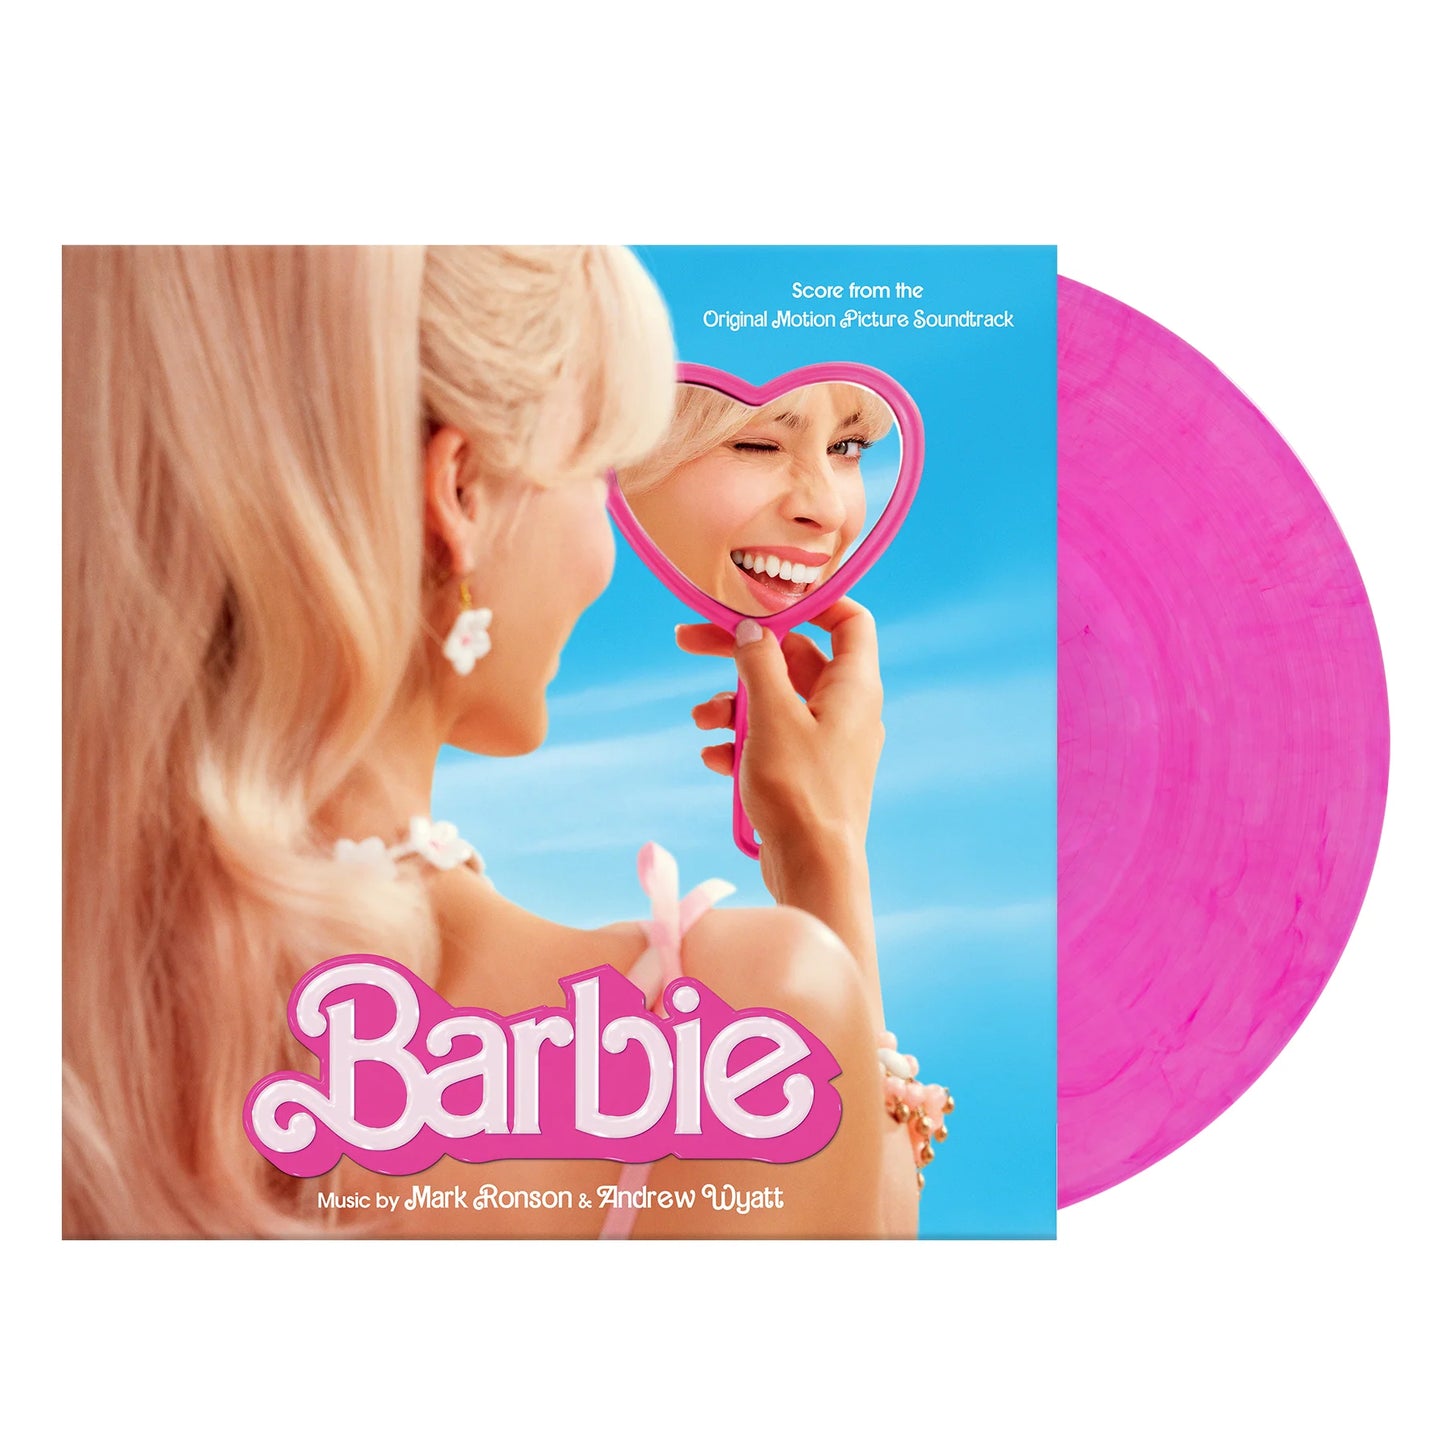 Mark Ronson & Andrew Wyatt - Barbie (Score from the Original Motion Picture Soundtrack) LP